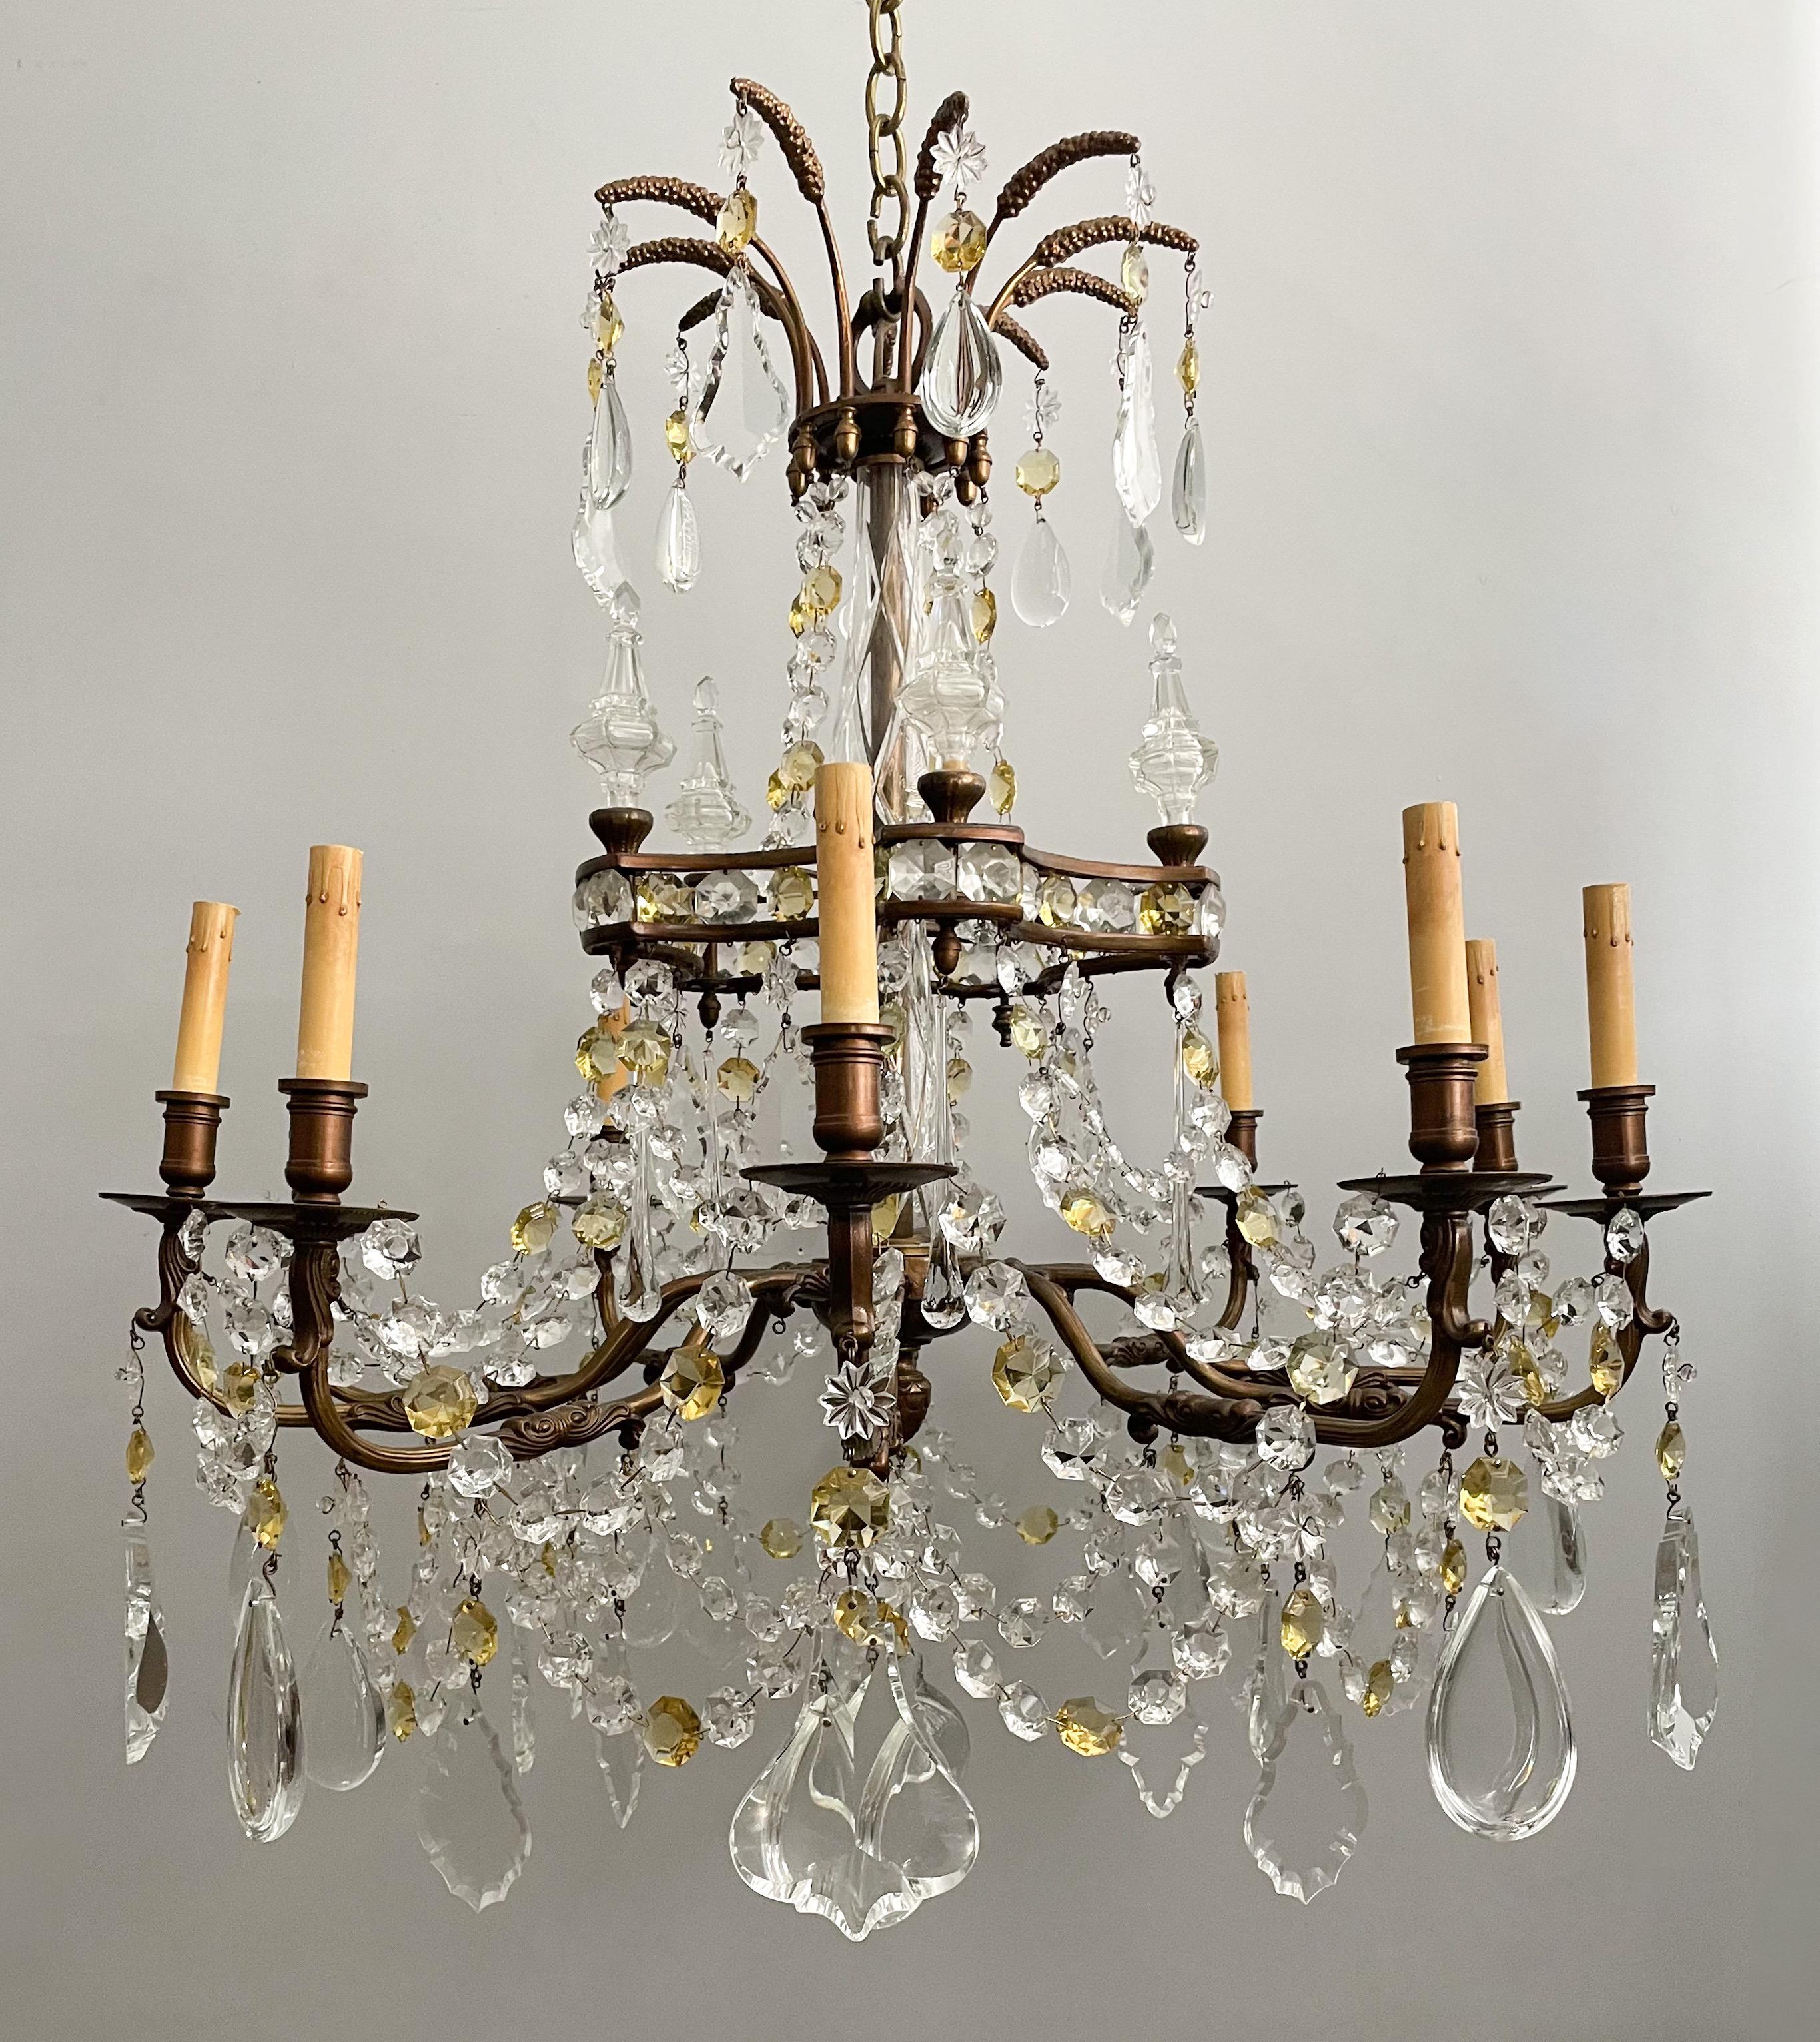 Gorgeous, French vintage bronze and crystal chandelier in the Louis XVI style. 

The chandelier features an ornate bronze frame with crystal and topaz glass decorations including removable crystal bobeches. 

The chandelier is wired and in